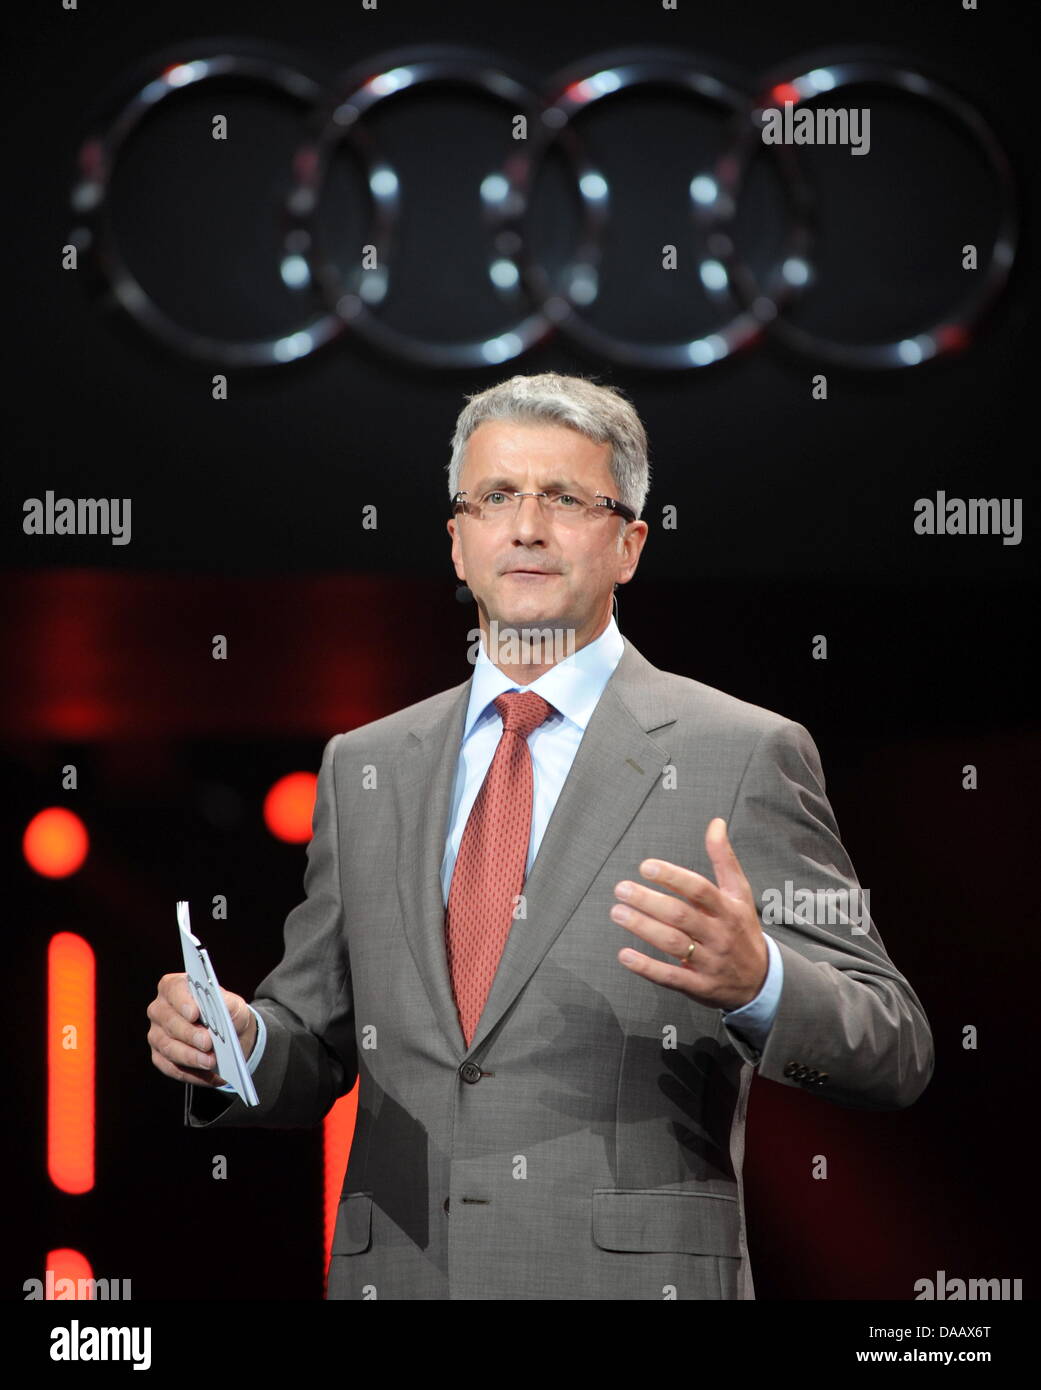 The chairman of the board of car manufacturer Audi AG, Rupert Stadler, speaks during the world premiere of the new Audi urban concept car at the International automobile fair IAA in Frankfurt Main, Germany, 11 September 2011. The IAA is considered the leading fair for the automobile industry. More than 1000 exhibitors from 32 countries are presenting their latest novelties at fair  Stock Photo